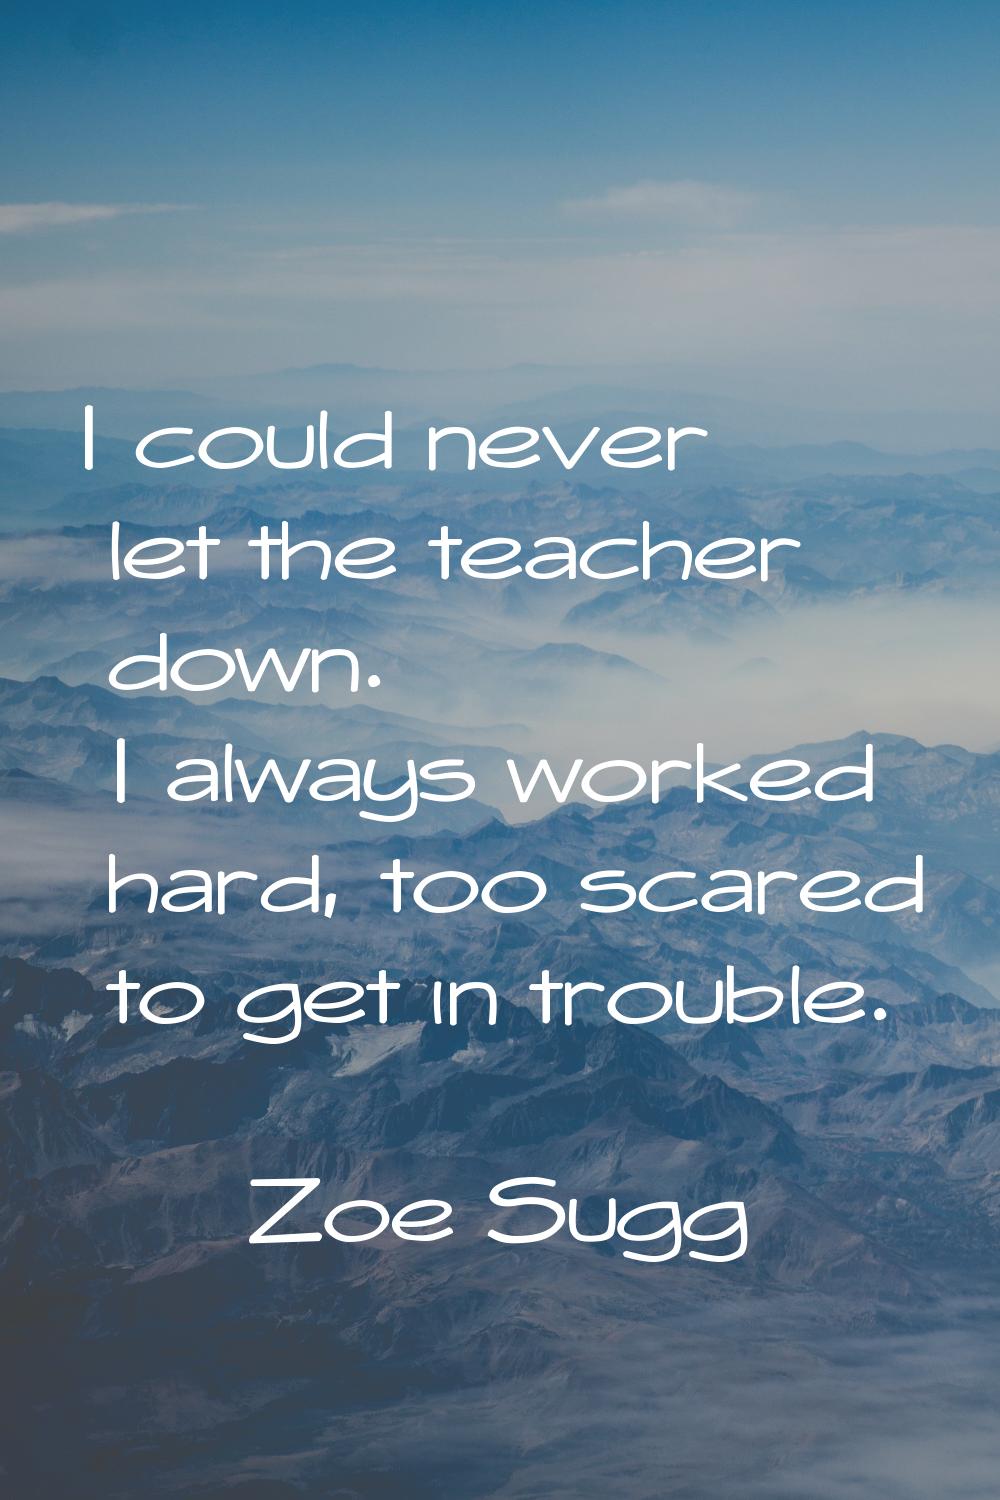 I could never let the teacher down. I always worked hard, too scared to get in trouble.